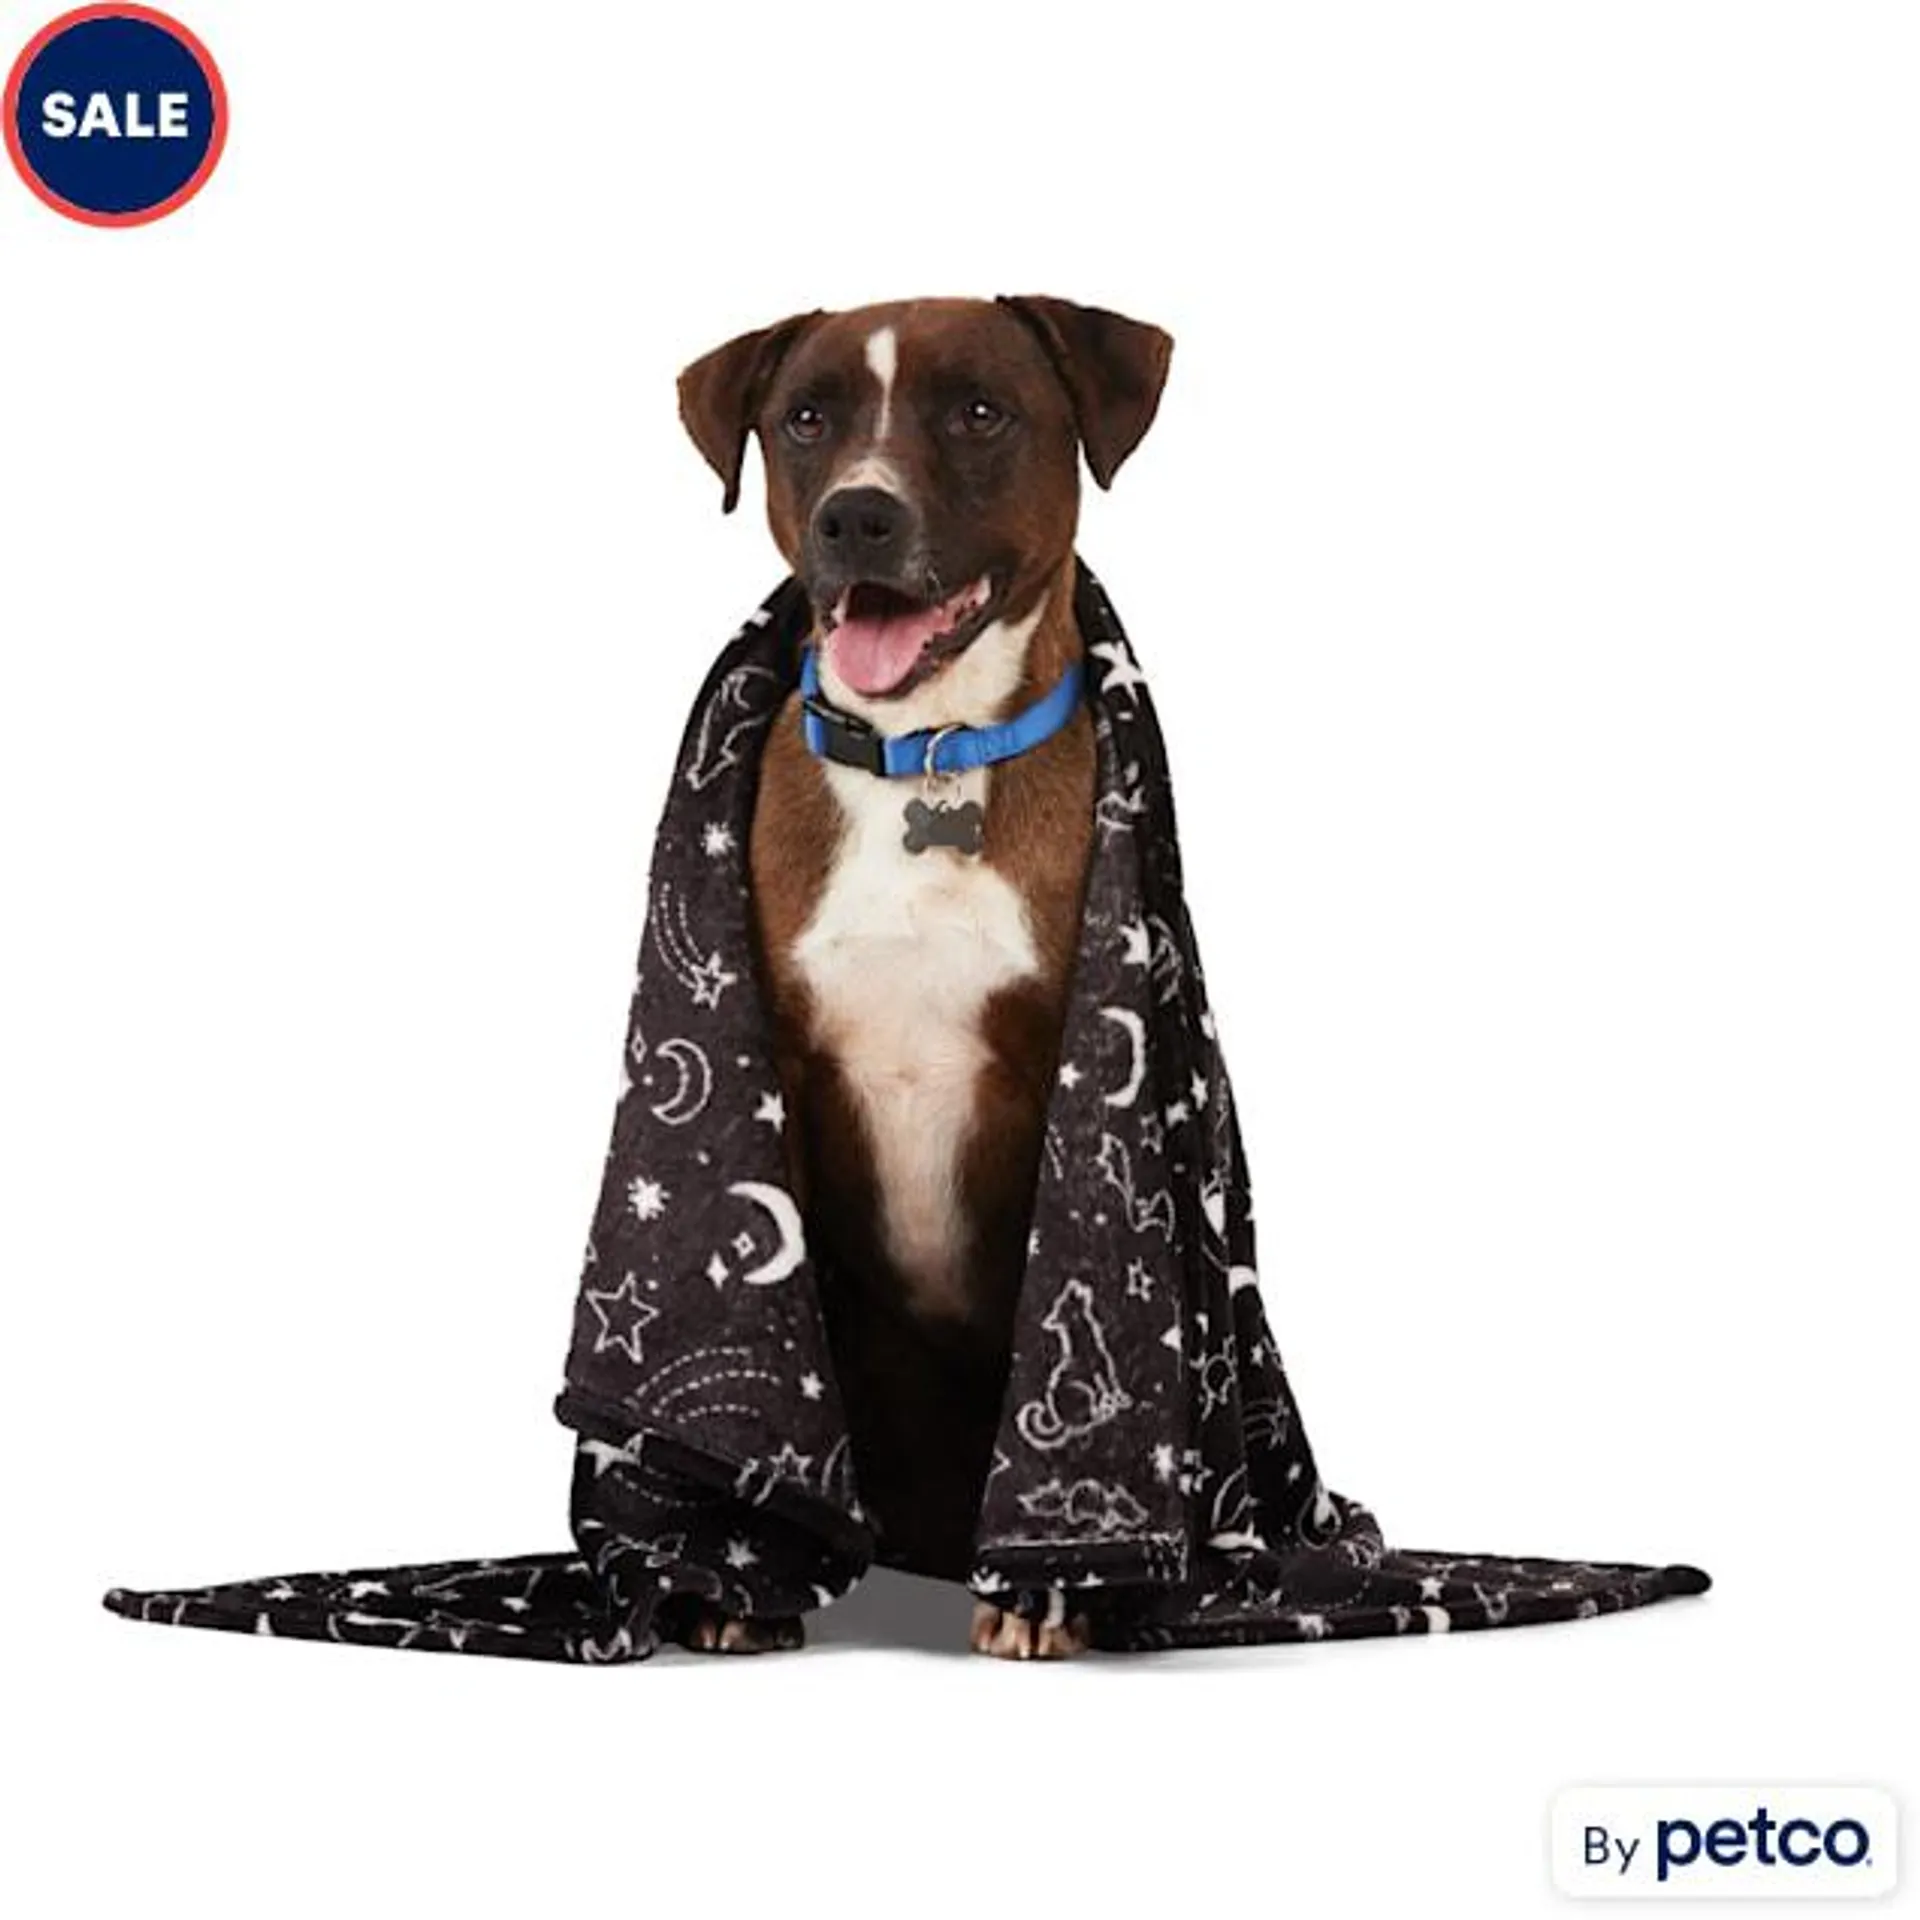 Bootique Celestial Throw Dog Bed, 40" L X 30" W, Black